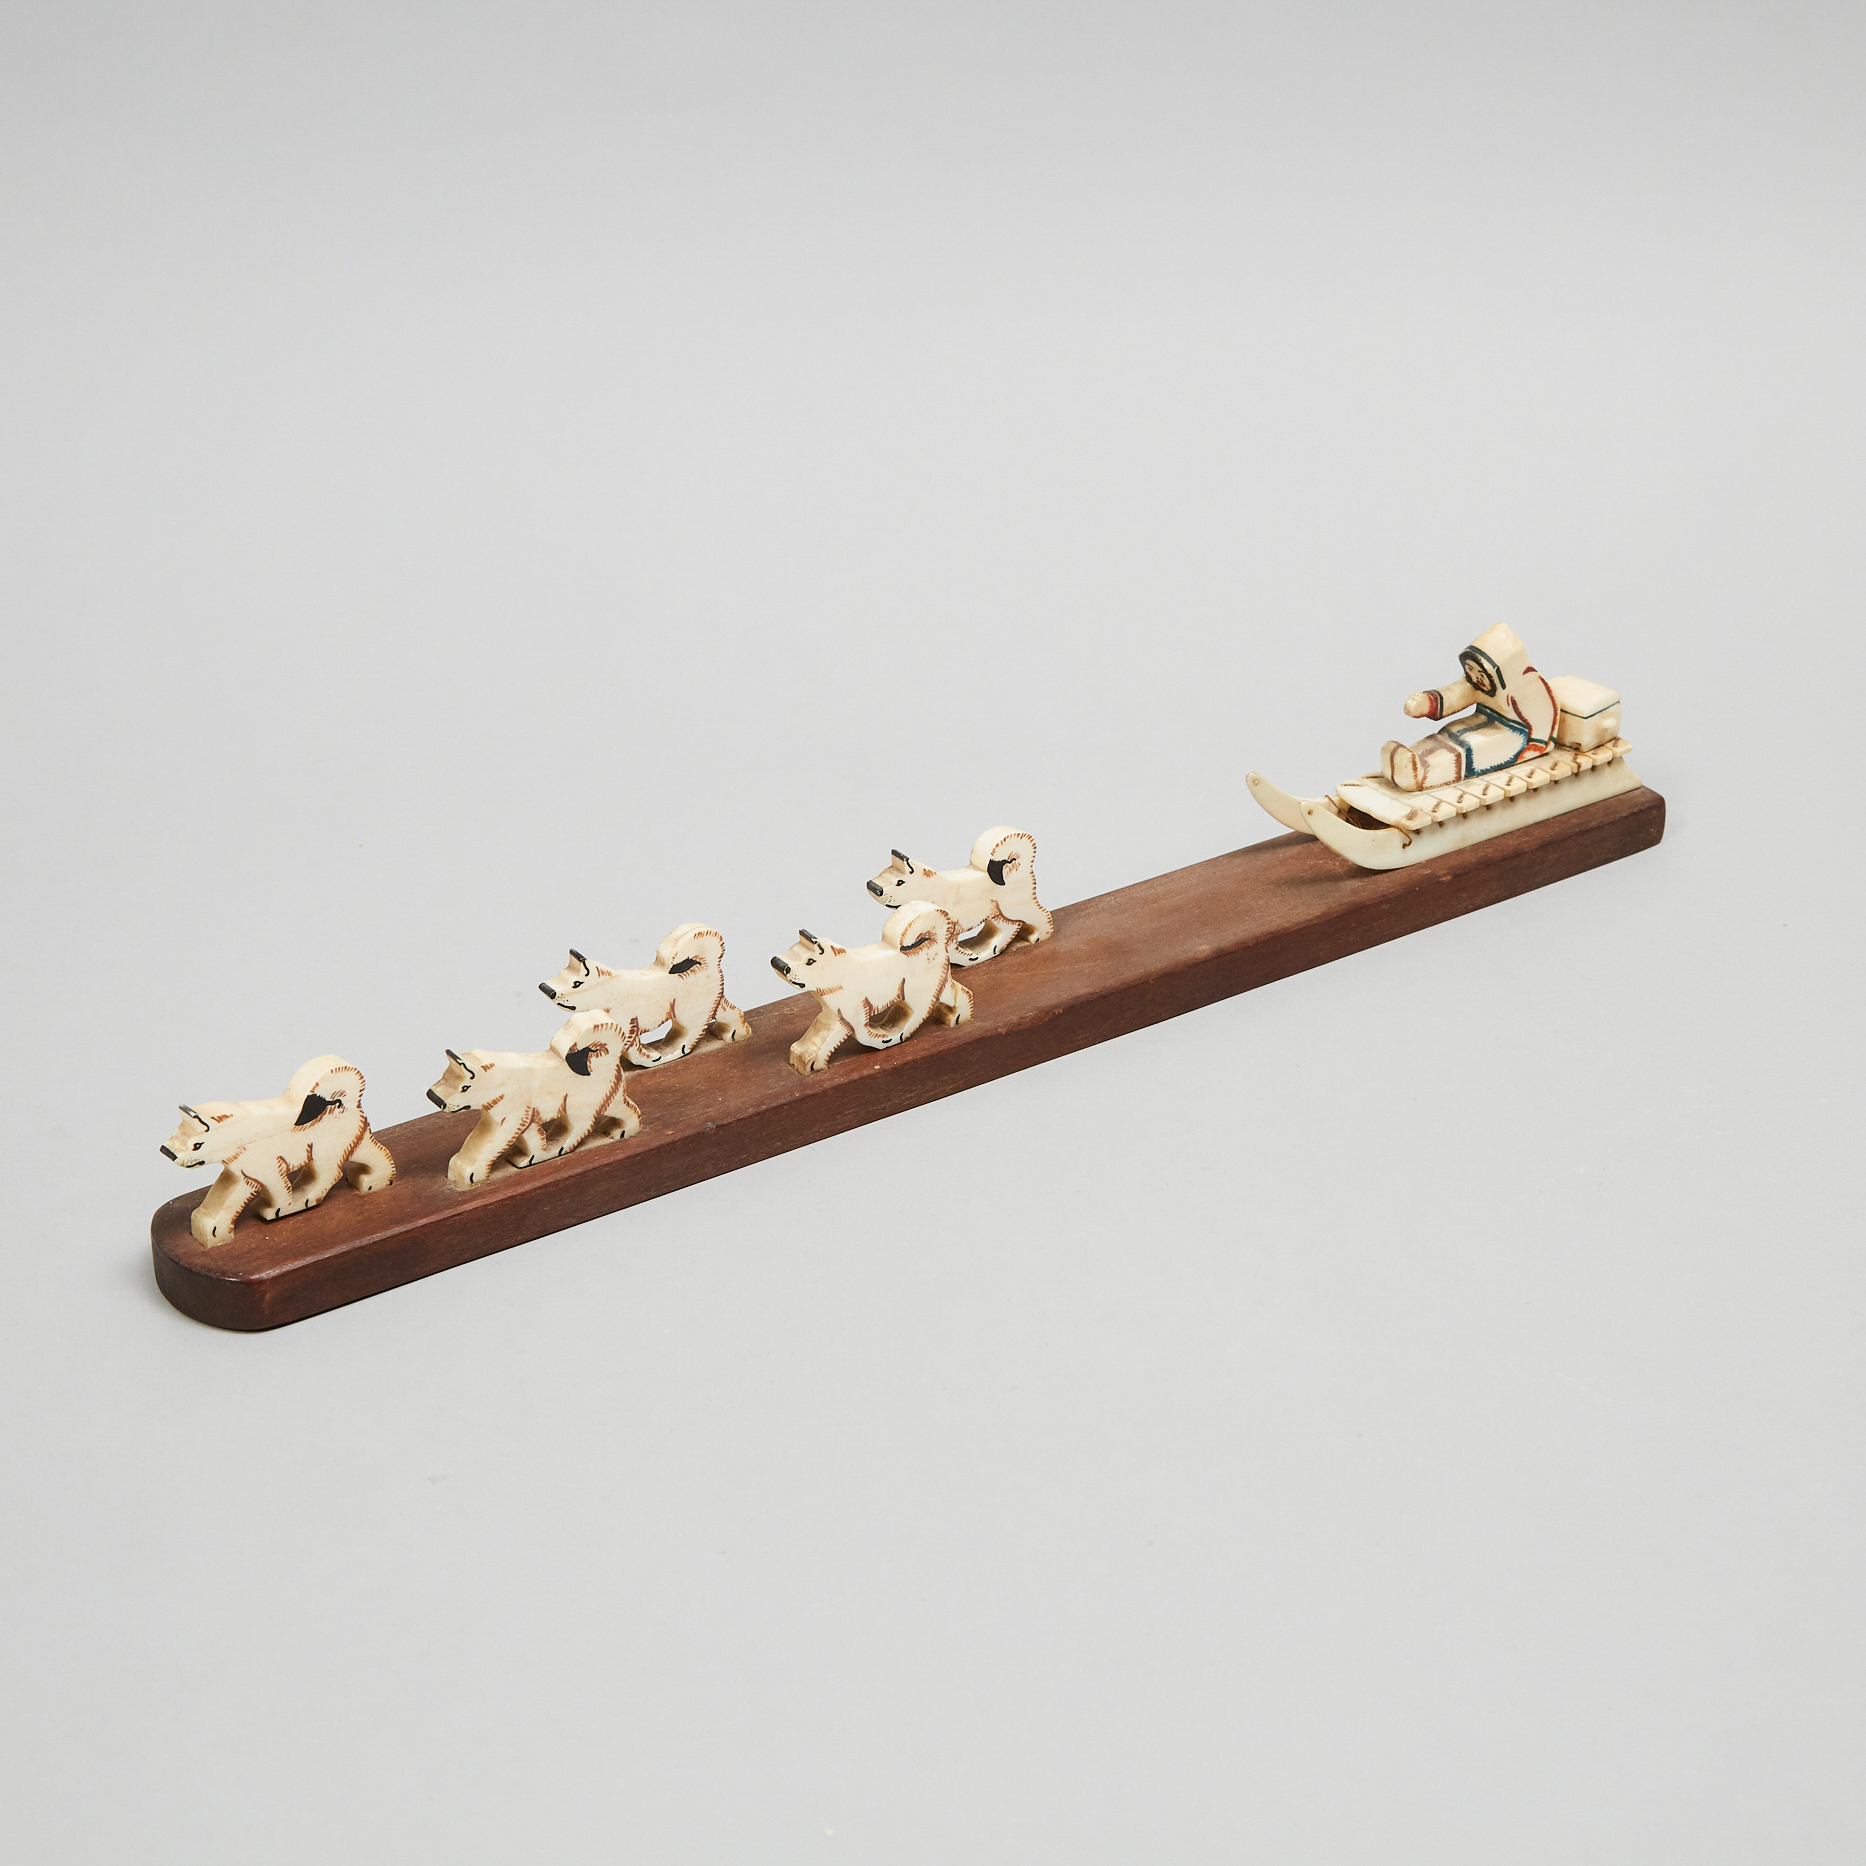 Grenfell Labrador Industries Marine Ivory and Wood Model of a Dog Sled and Team, mid 20th century